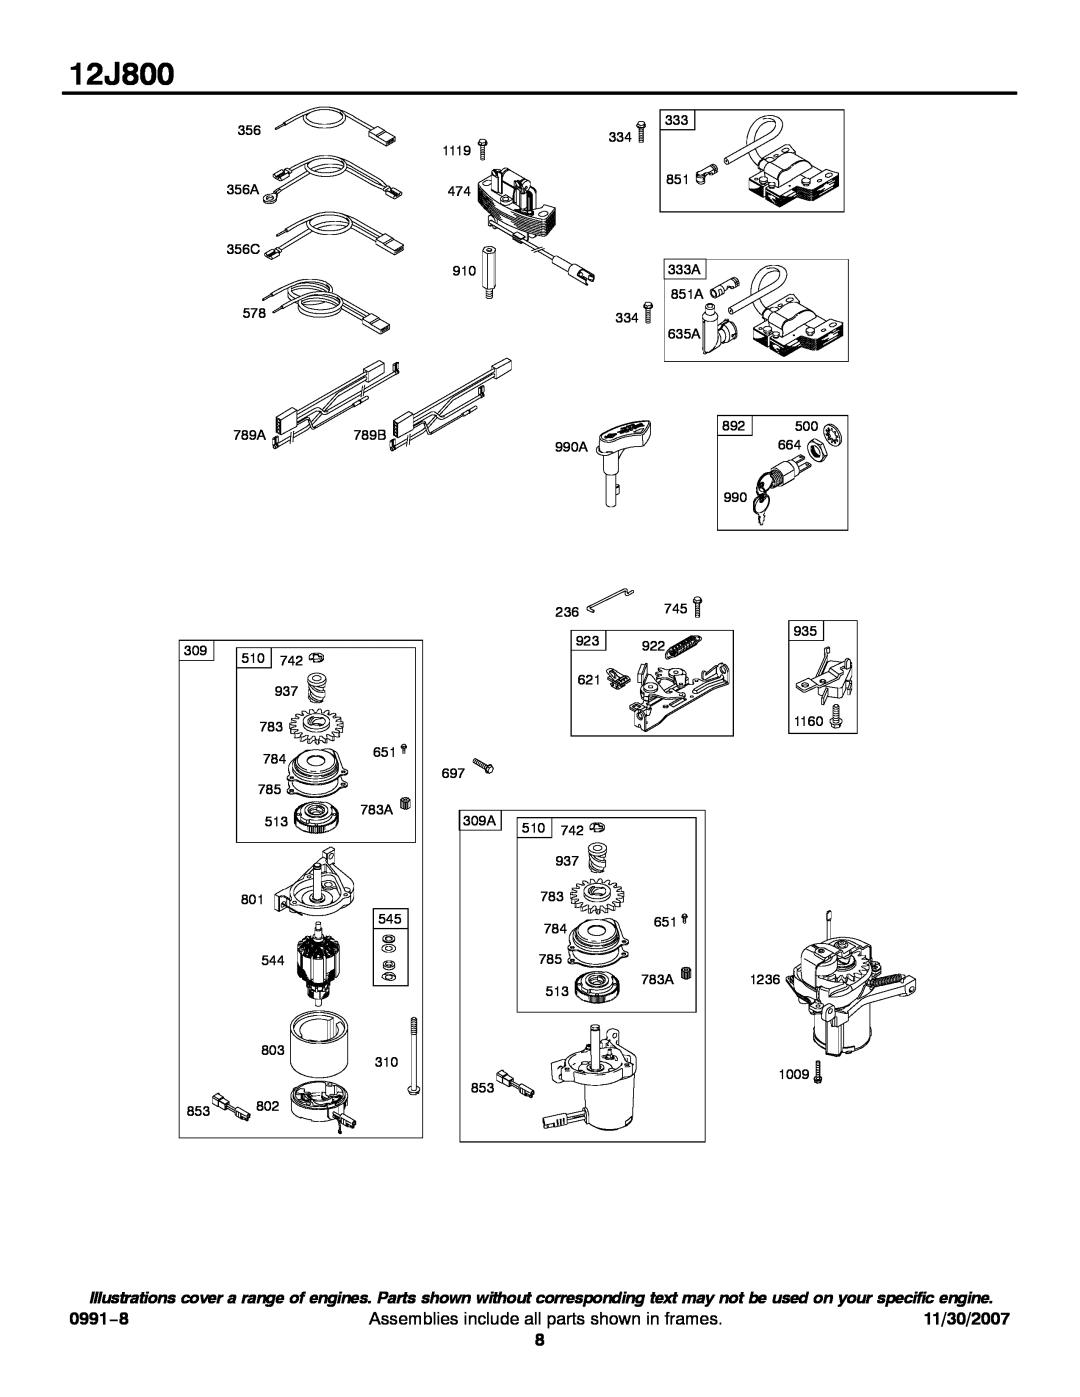 Briggs & Stratton 12J800 service manual 0991−8, Assemblies include all parts shown in frames, 11/30/2007, 356A, 990A 